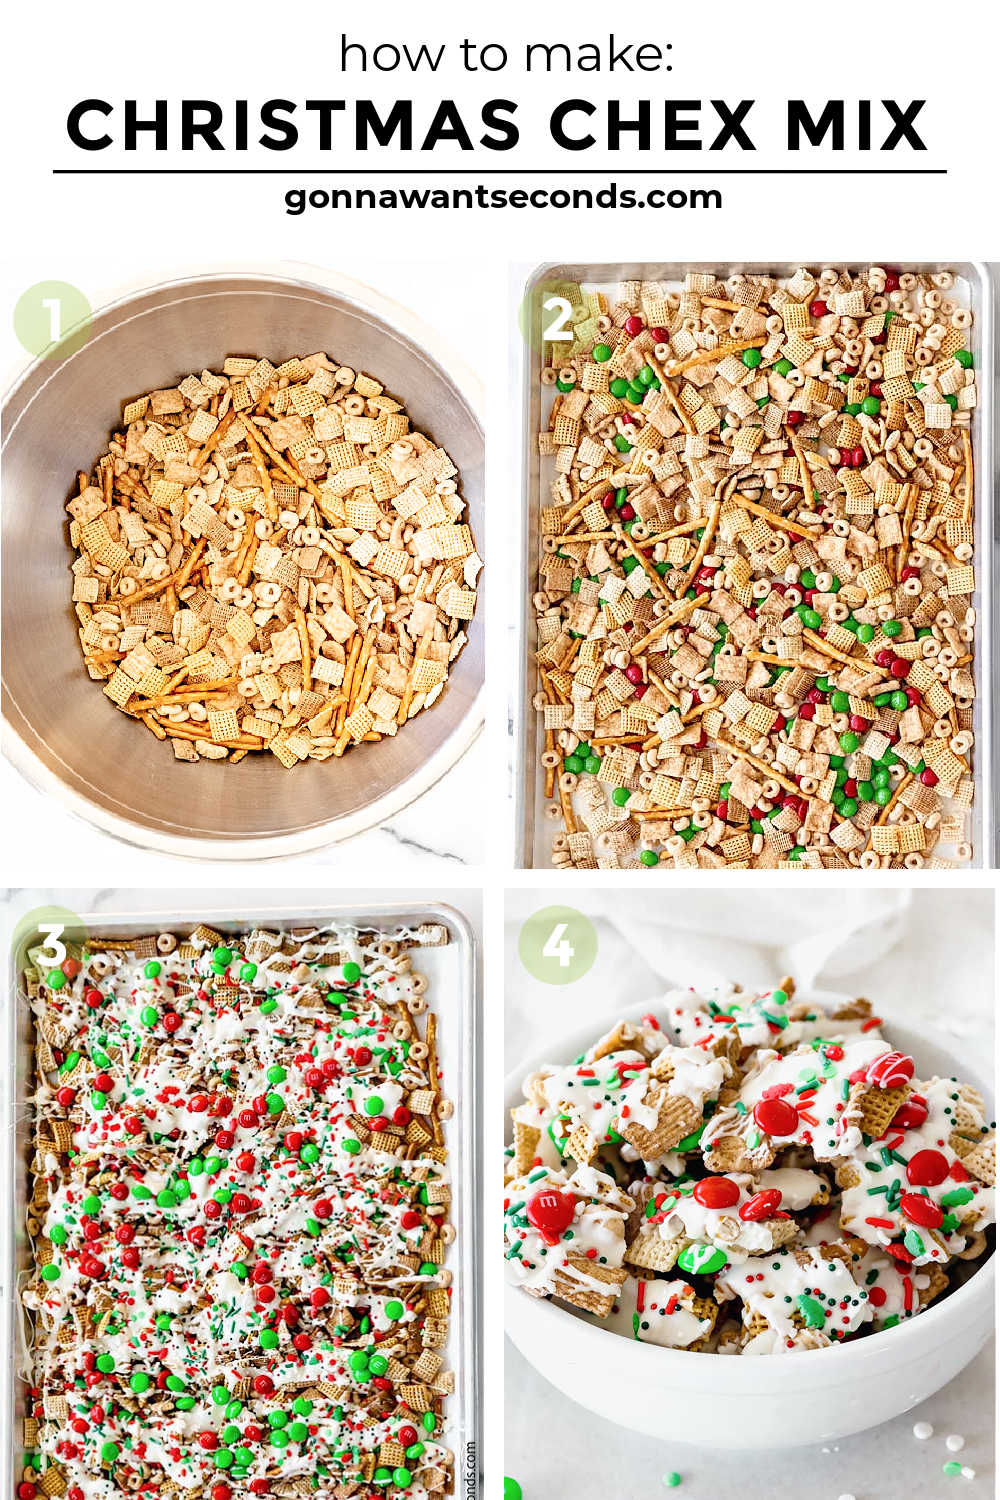 Step by step how to make Christmas Chex Mix